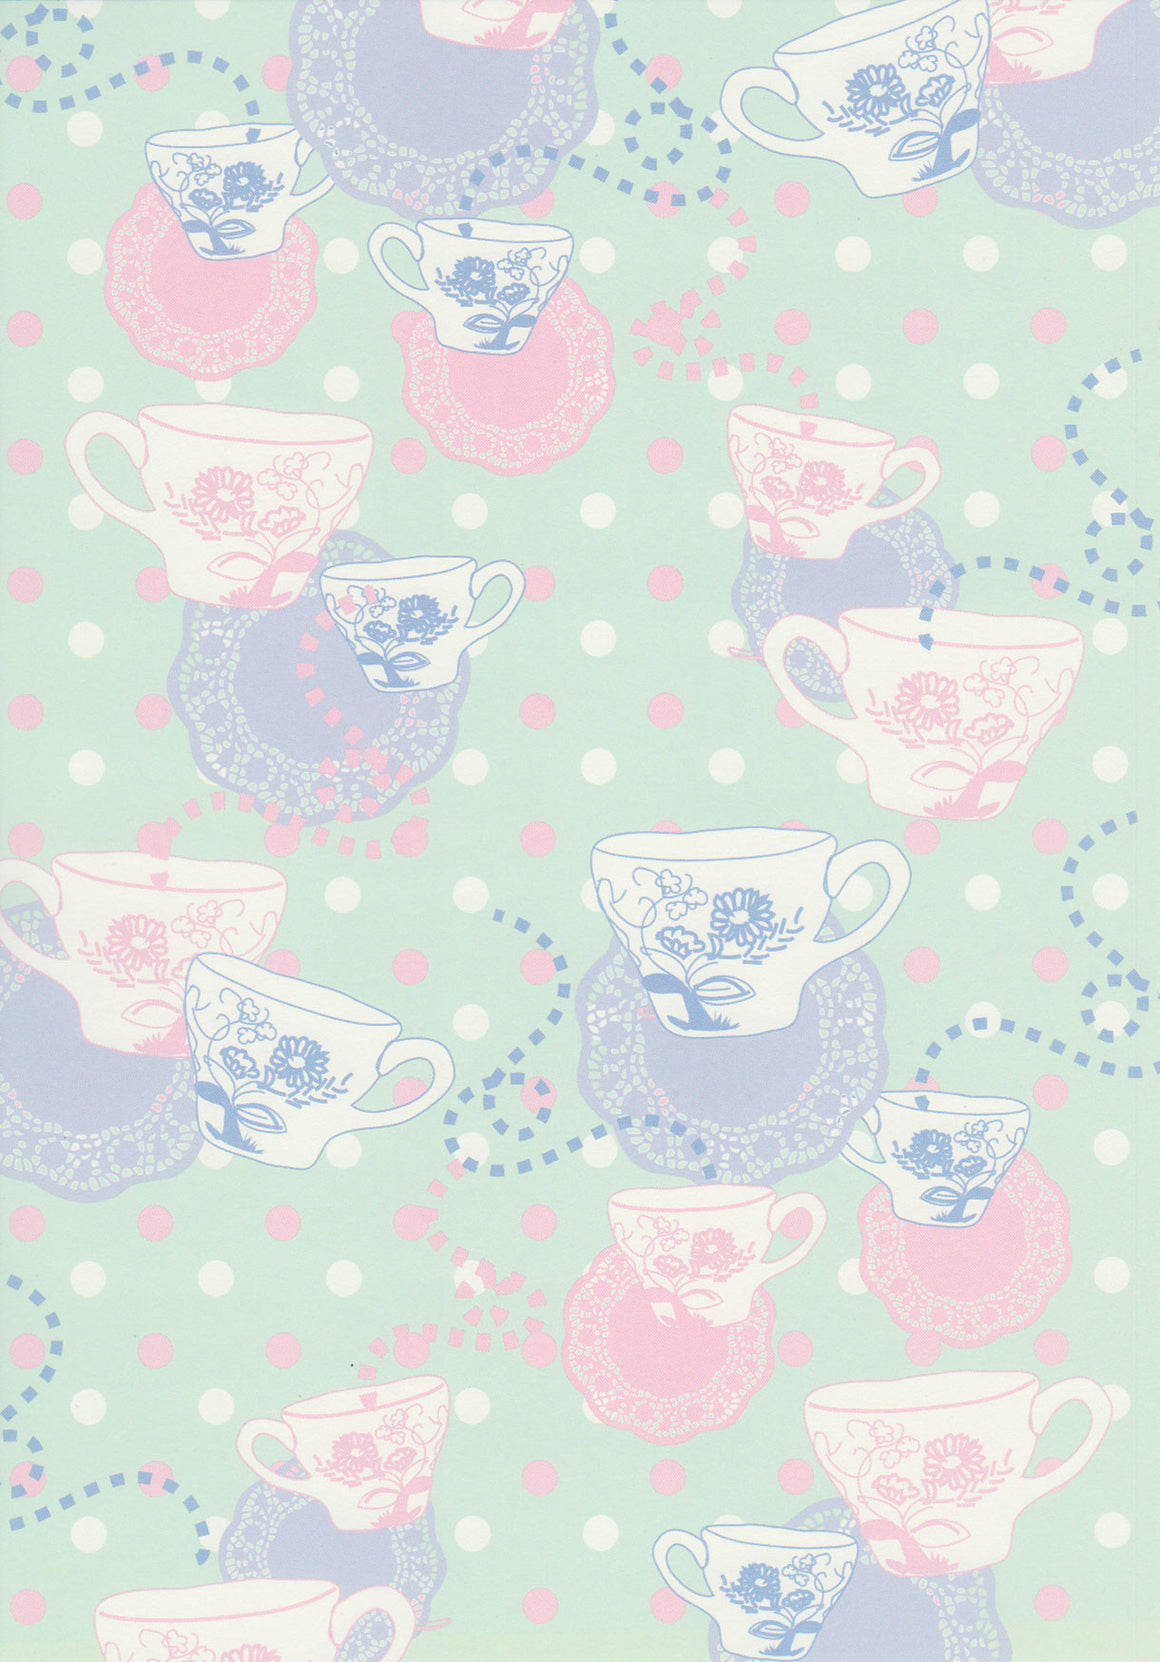 Lewis Carroll inspired pattern paper